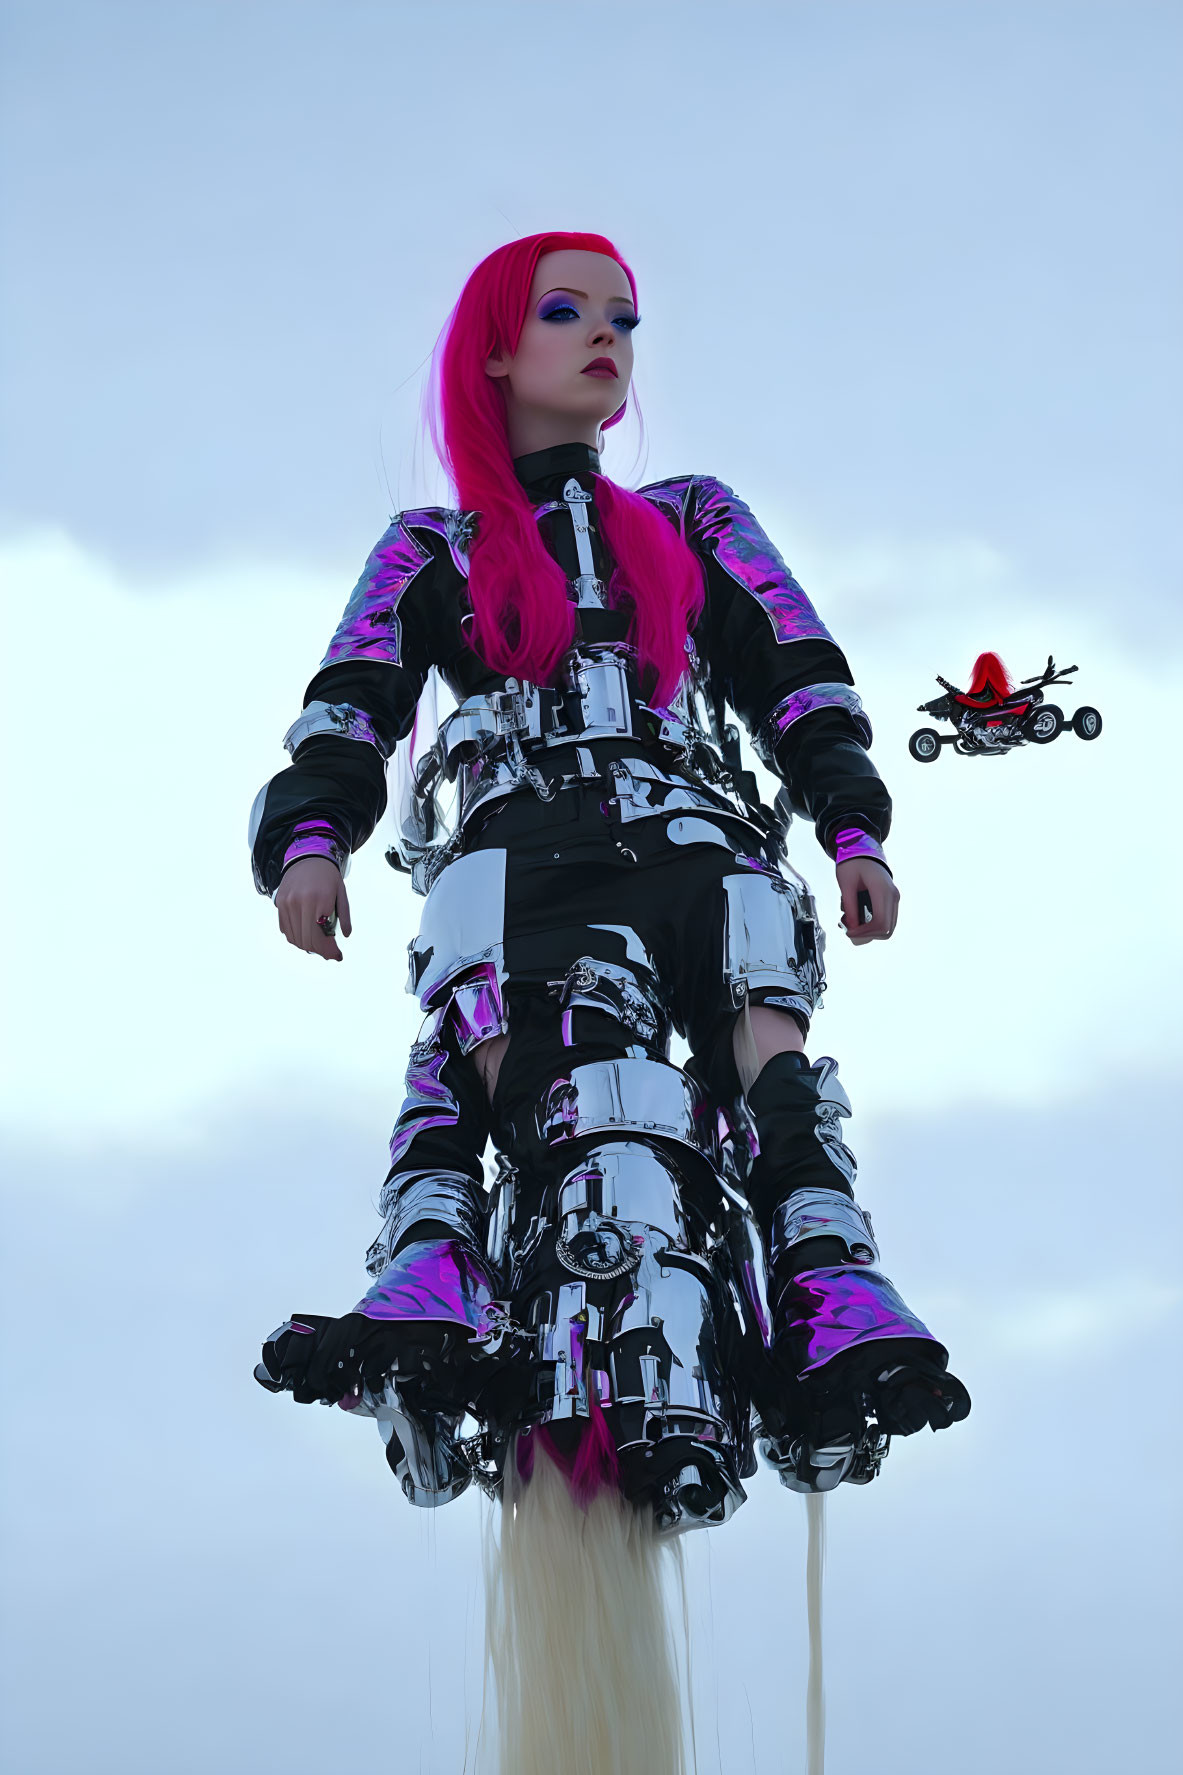 Vibrant pink hair person in futuristic outfit with hovering effect.